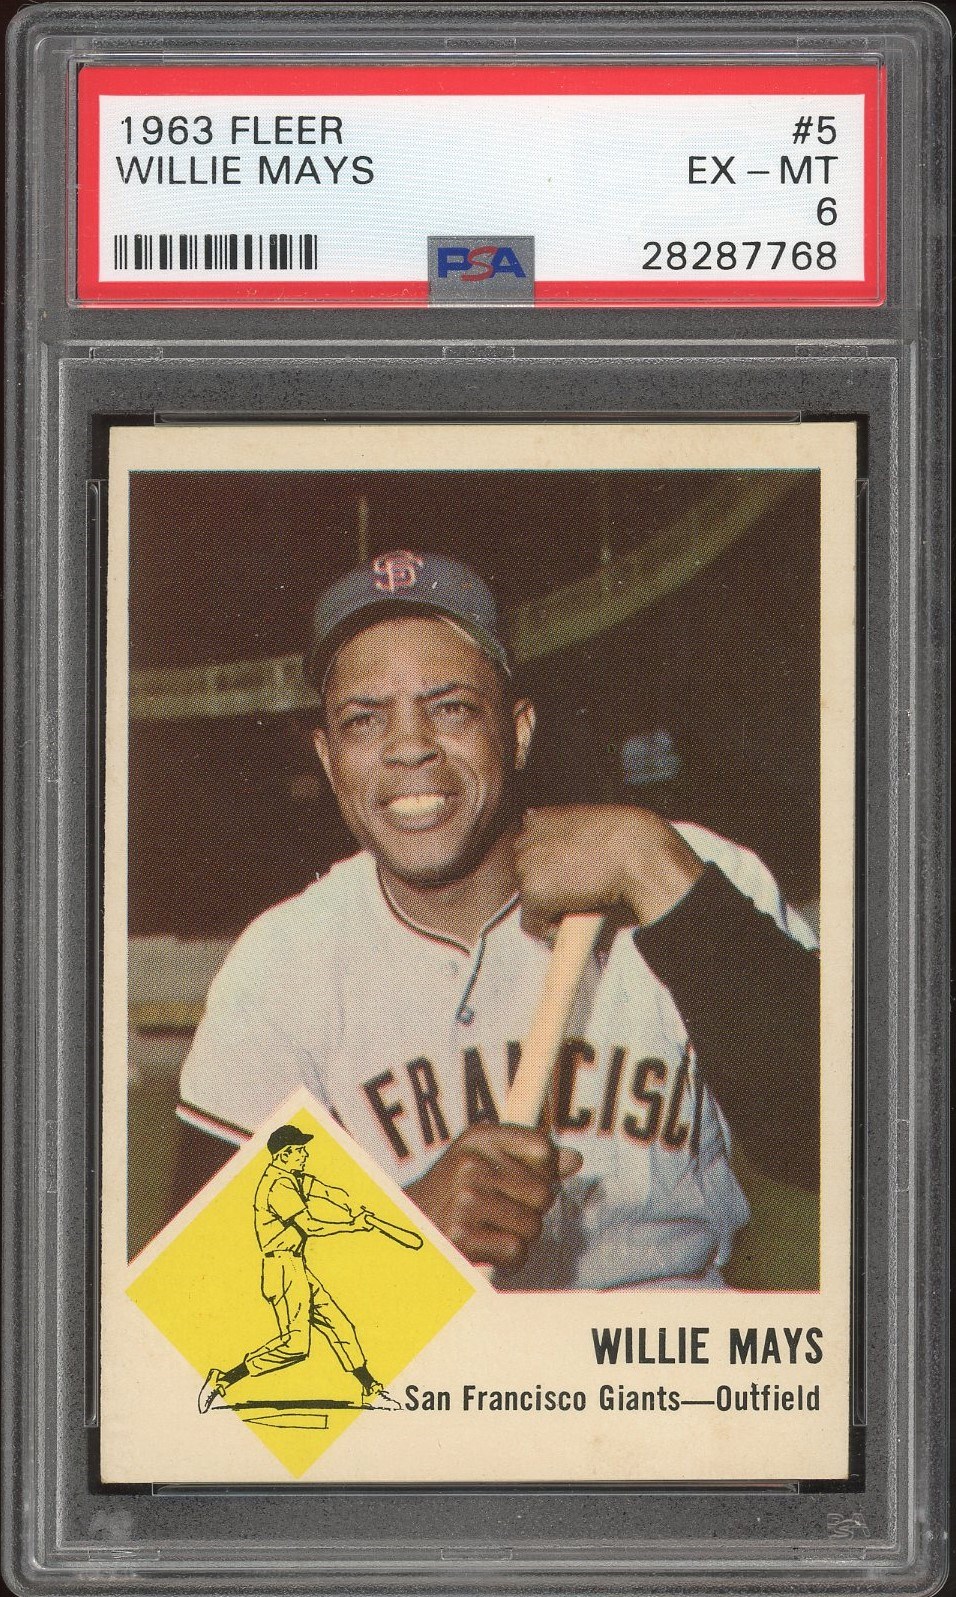 - 1959-1965 Willie Mays Graded Cards (5)